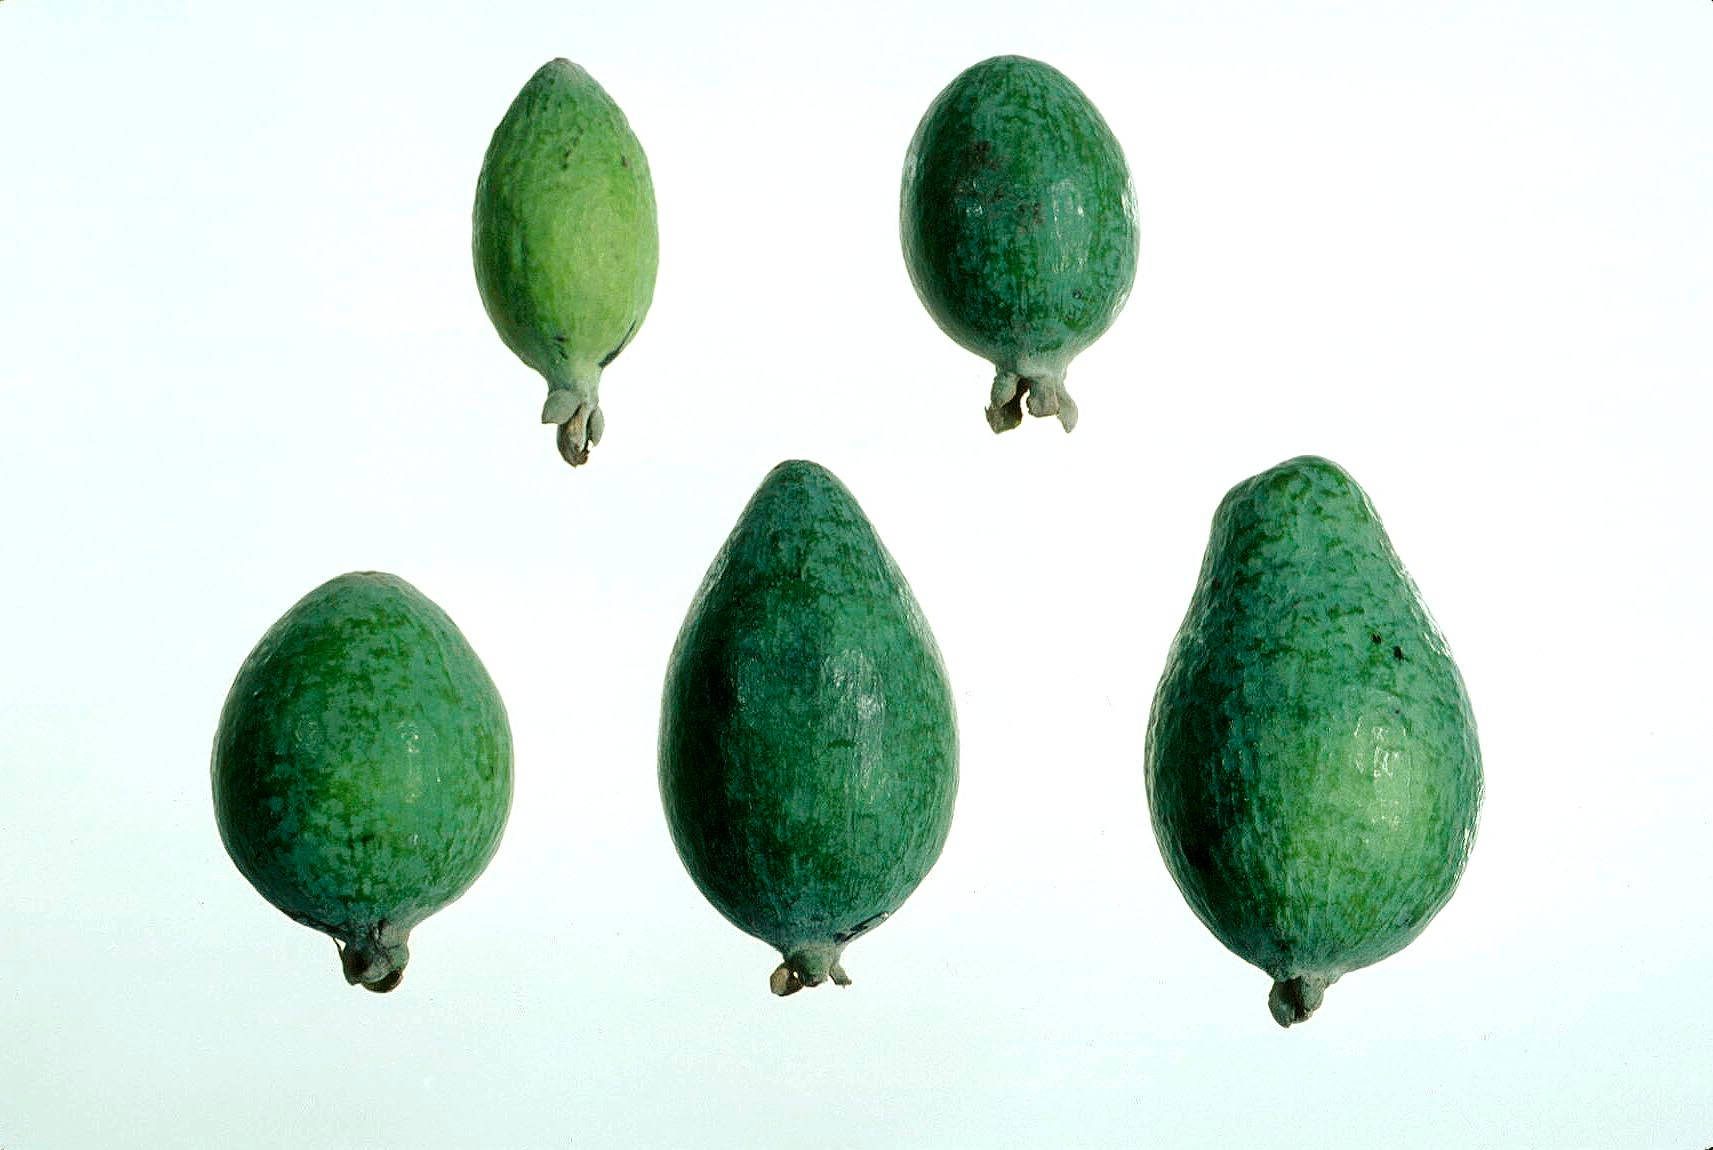 Different Shades Of Feijoa Wallpaper